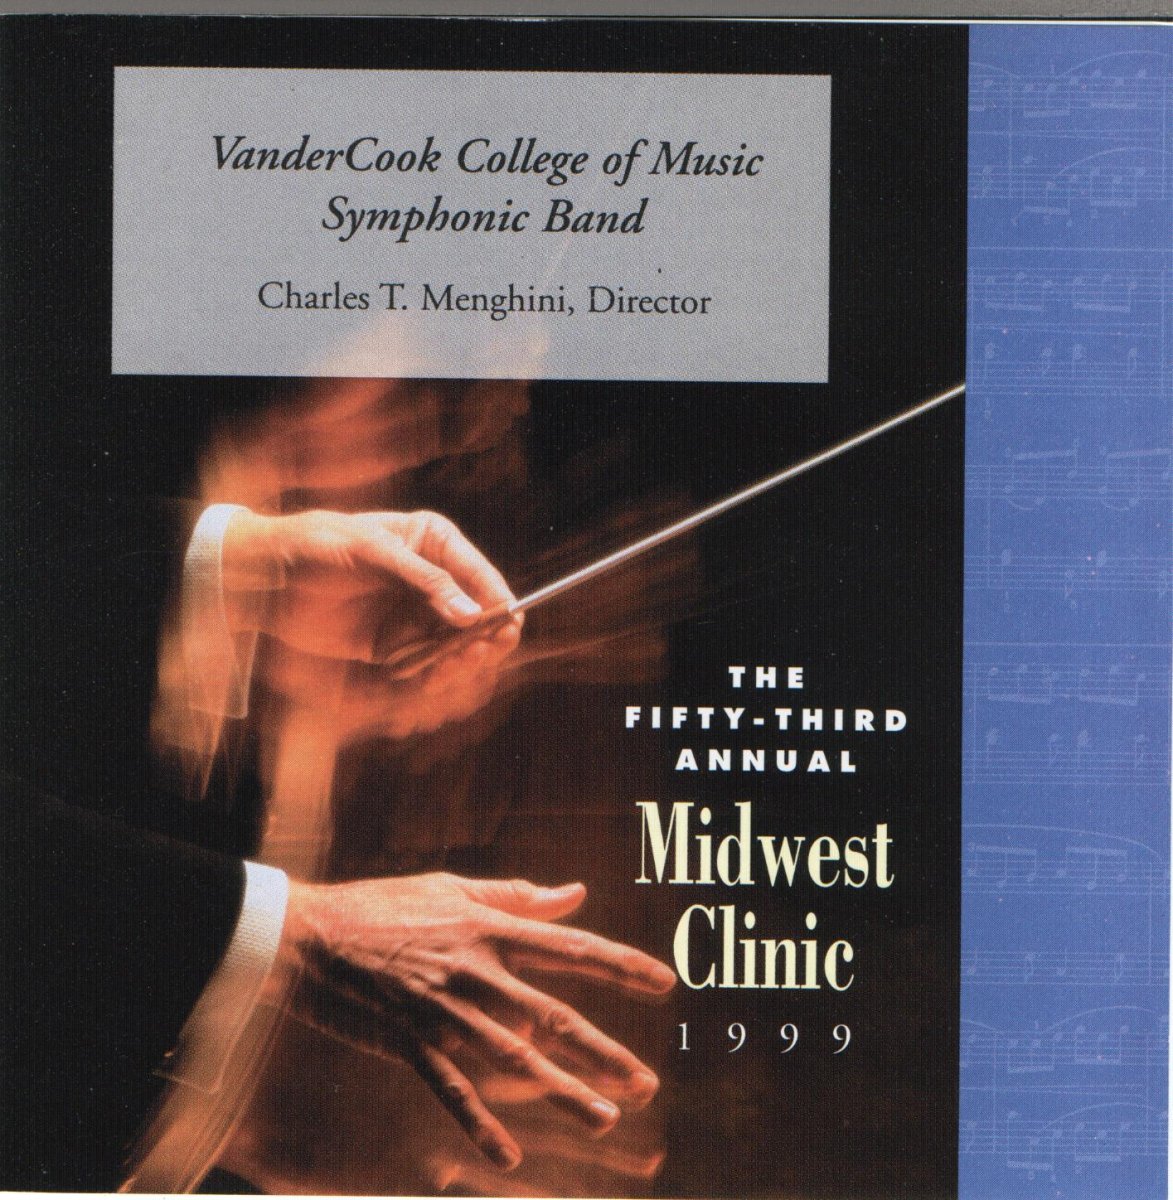 1999 Midwest Clinic: VanderCook College of Music Symphonic Band - hacer clic aqu